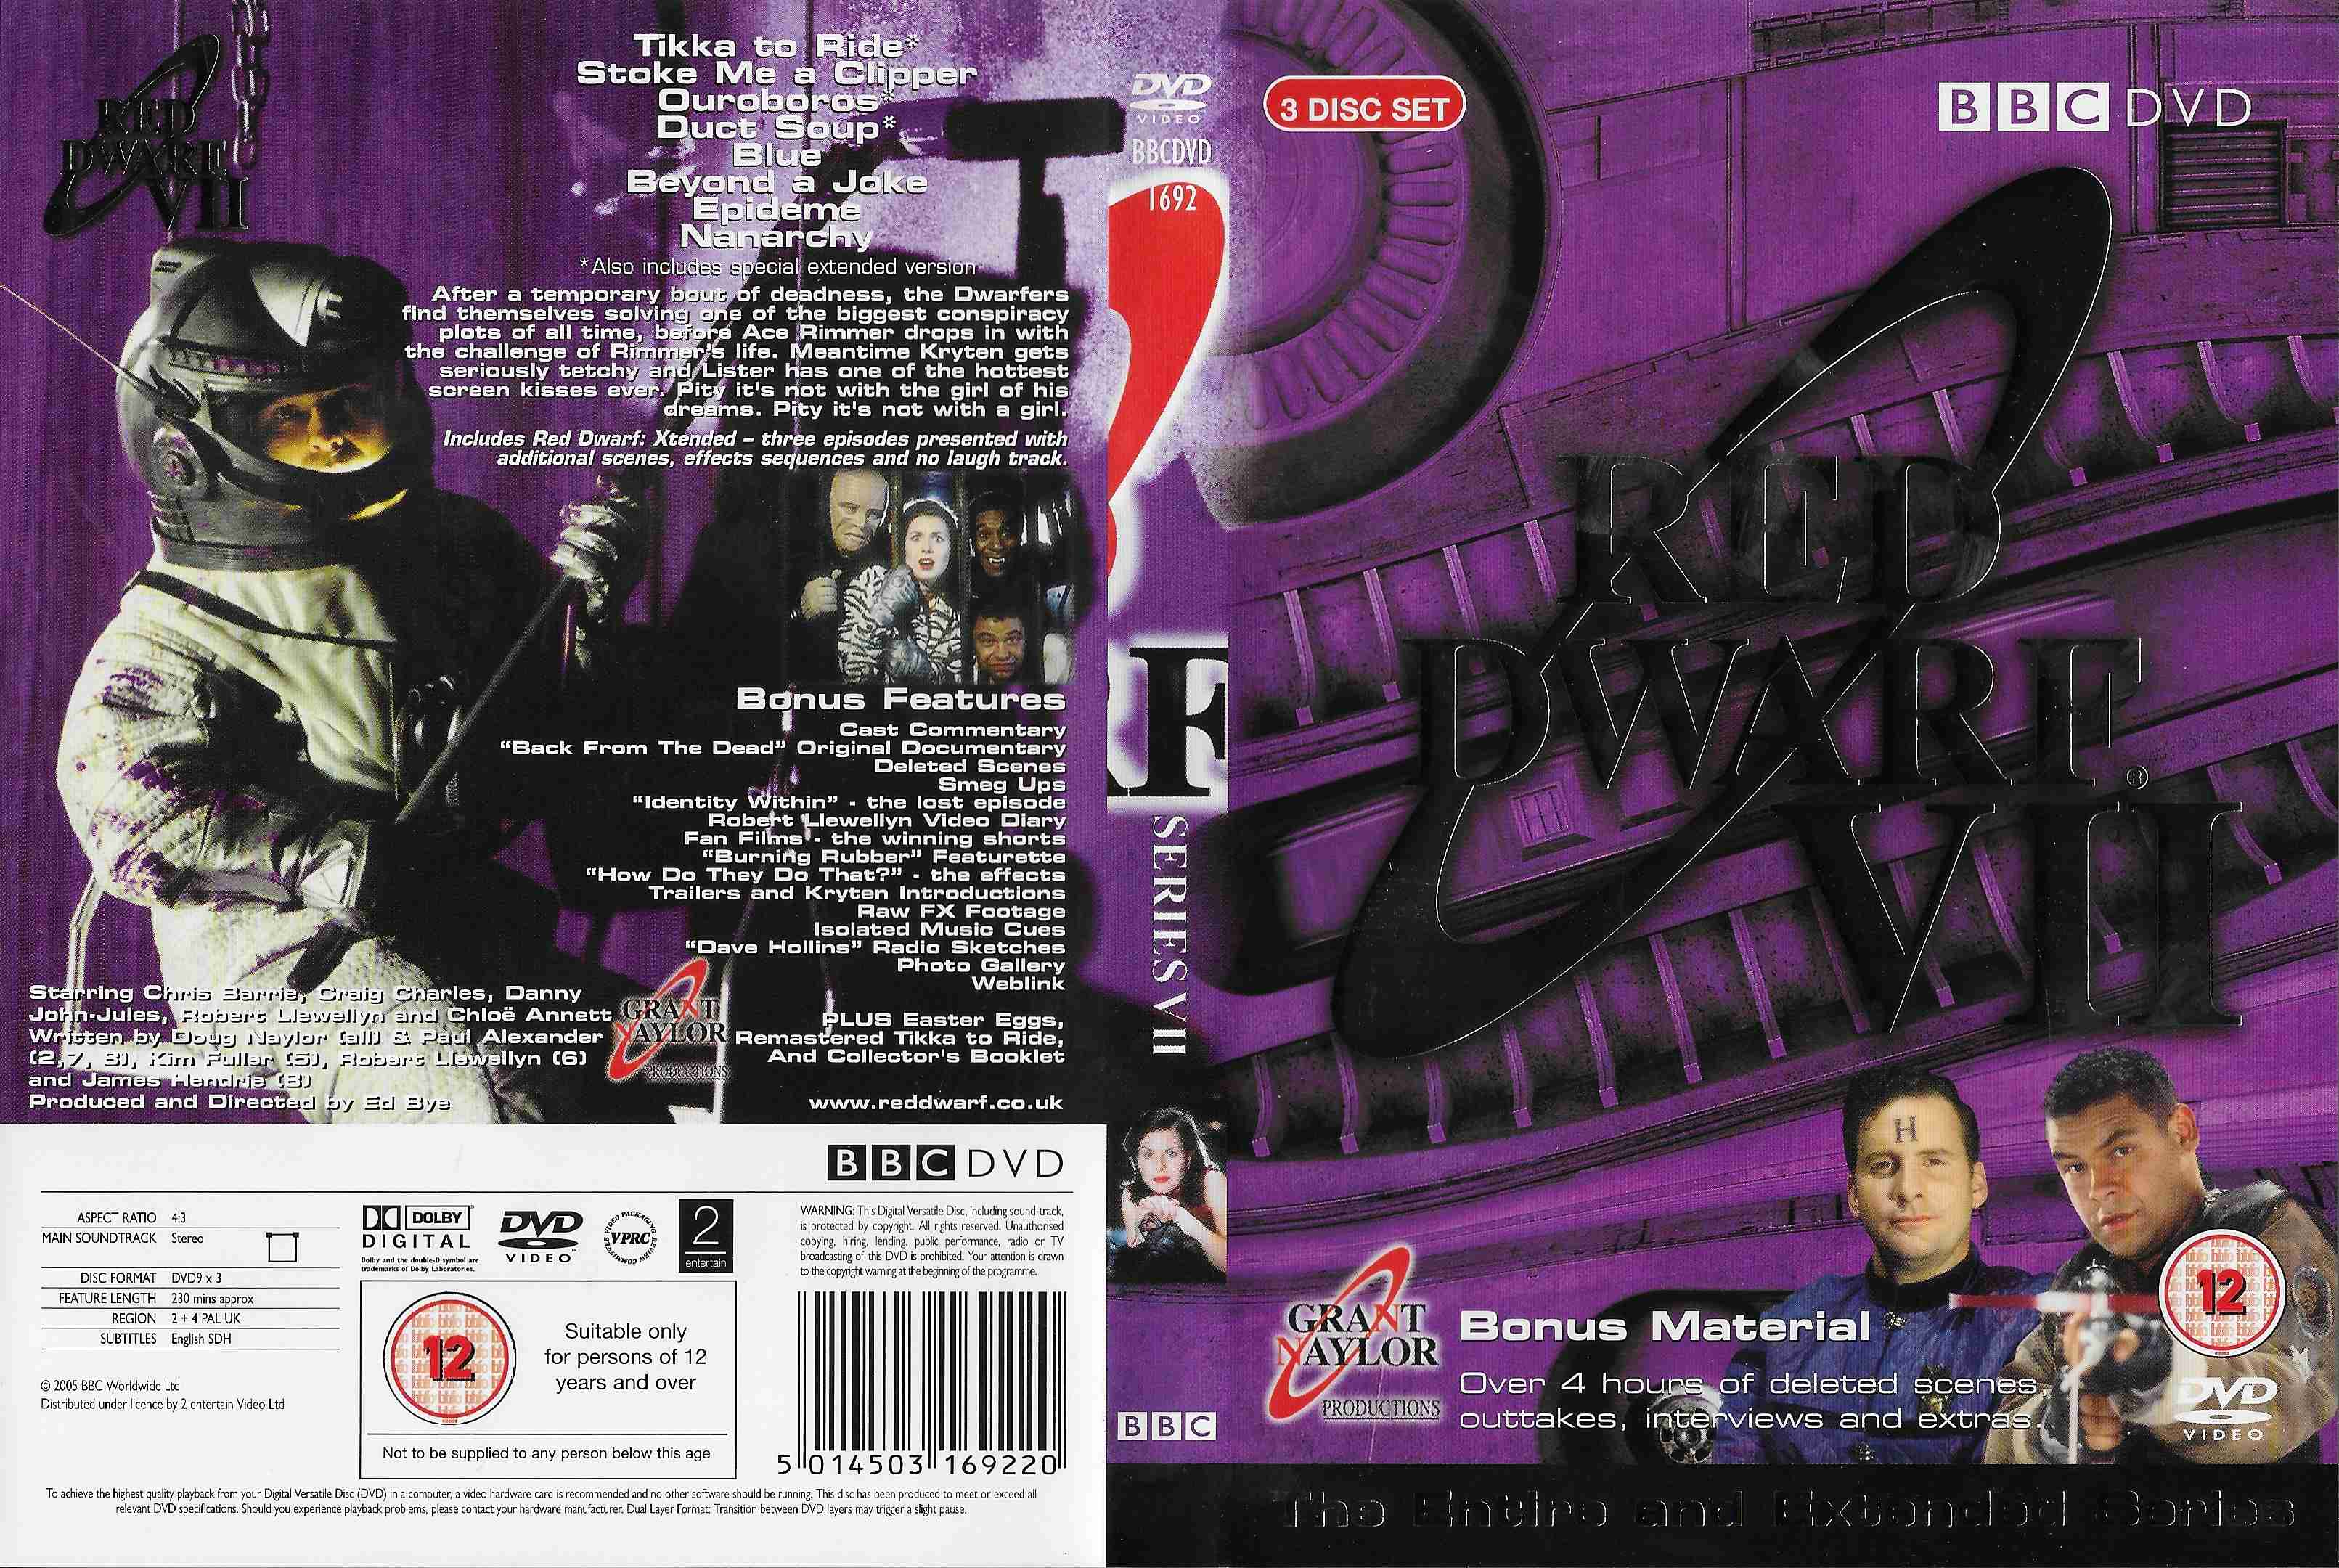 Picture of BBCDVD 1692 Red dwarf - Series VII by artist Rob Grant / Doug Naylor from the BBC records and Tapes library